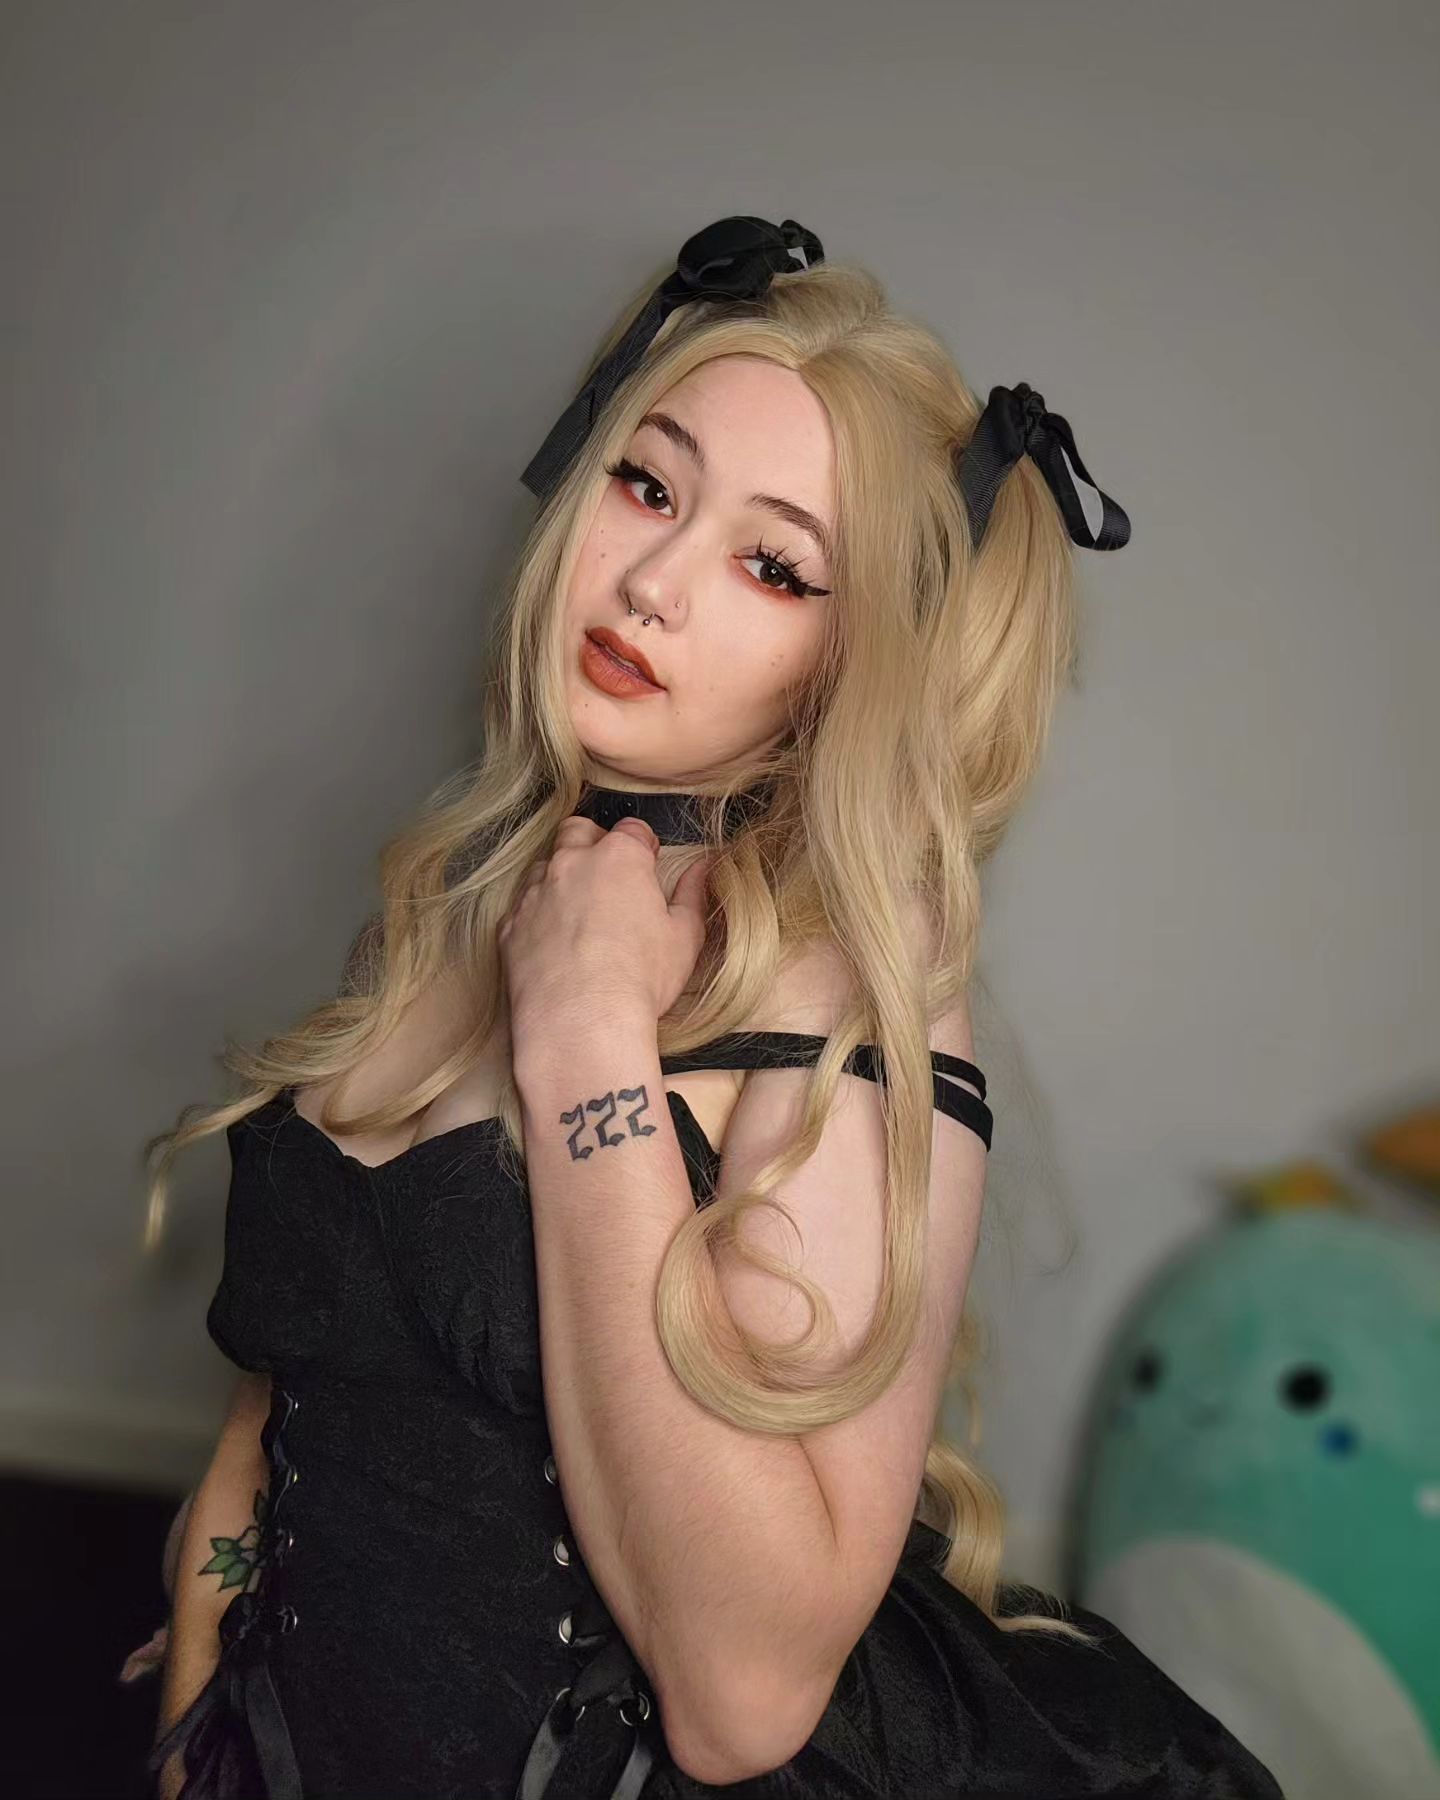 Why do we complicate things when they're so simple? 🖤📓
.
🎥 this month 👀 perhaps for free? 
.
.
.
.
.
.
.
.
.
.
.
.
.
.
.
.
.
.
#cosplay #fakebody #misaamane #misacosplay #fyp #explore #altgirl #tattoos #fashion #misaamanedeathnote #deathnote #deathnotecosplay